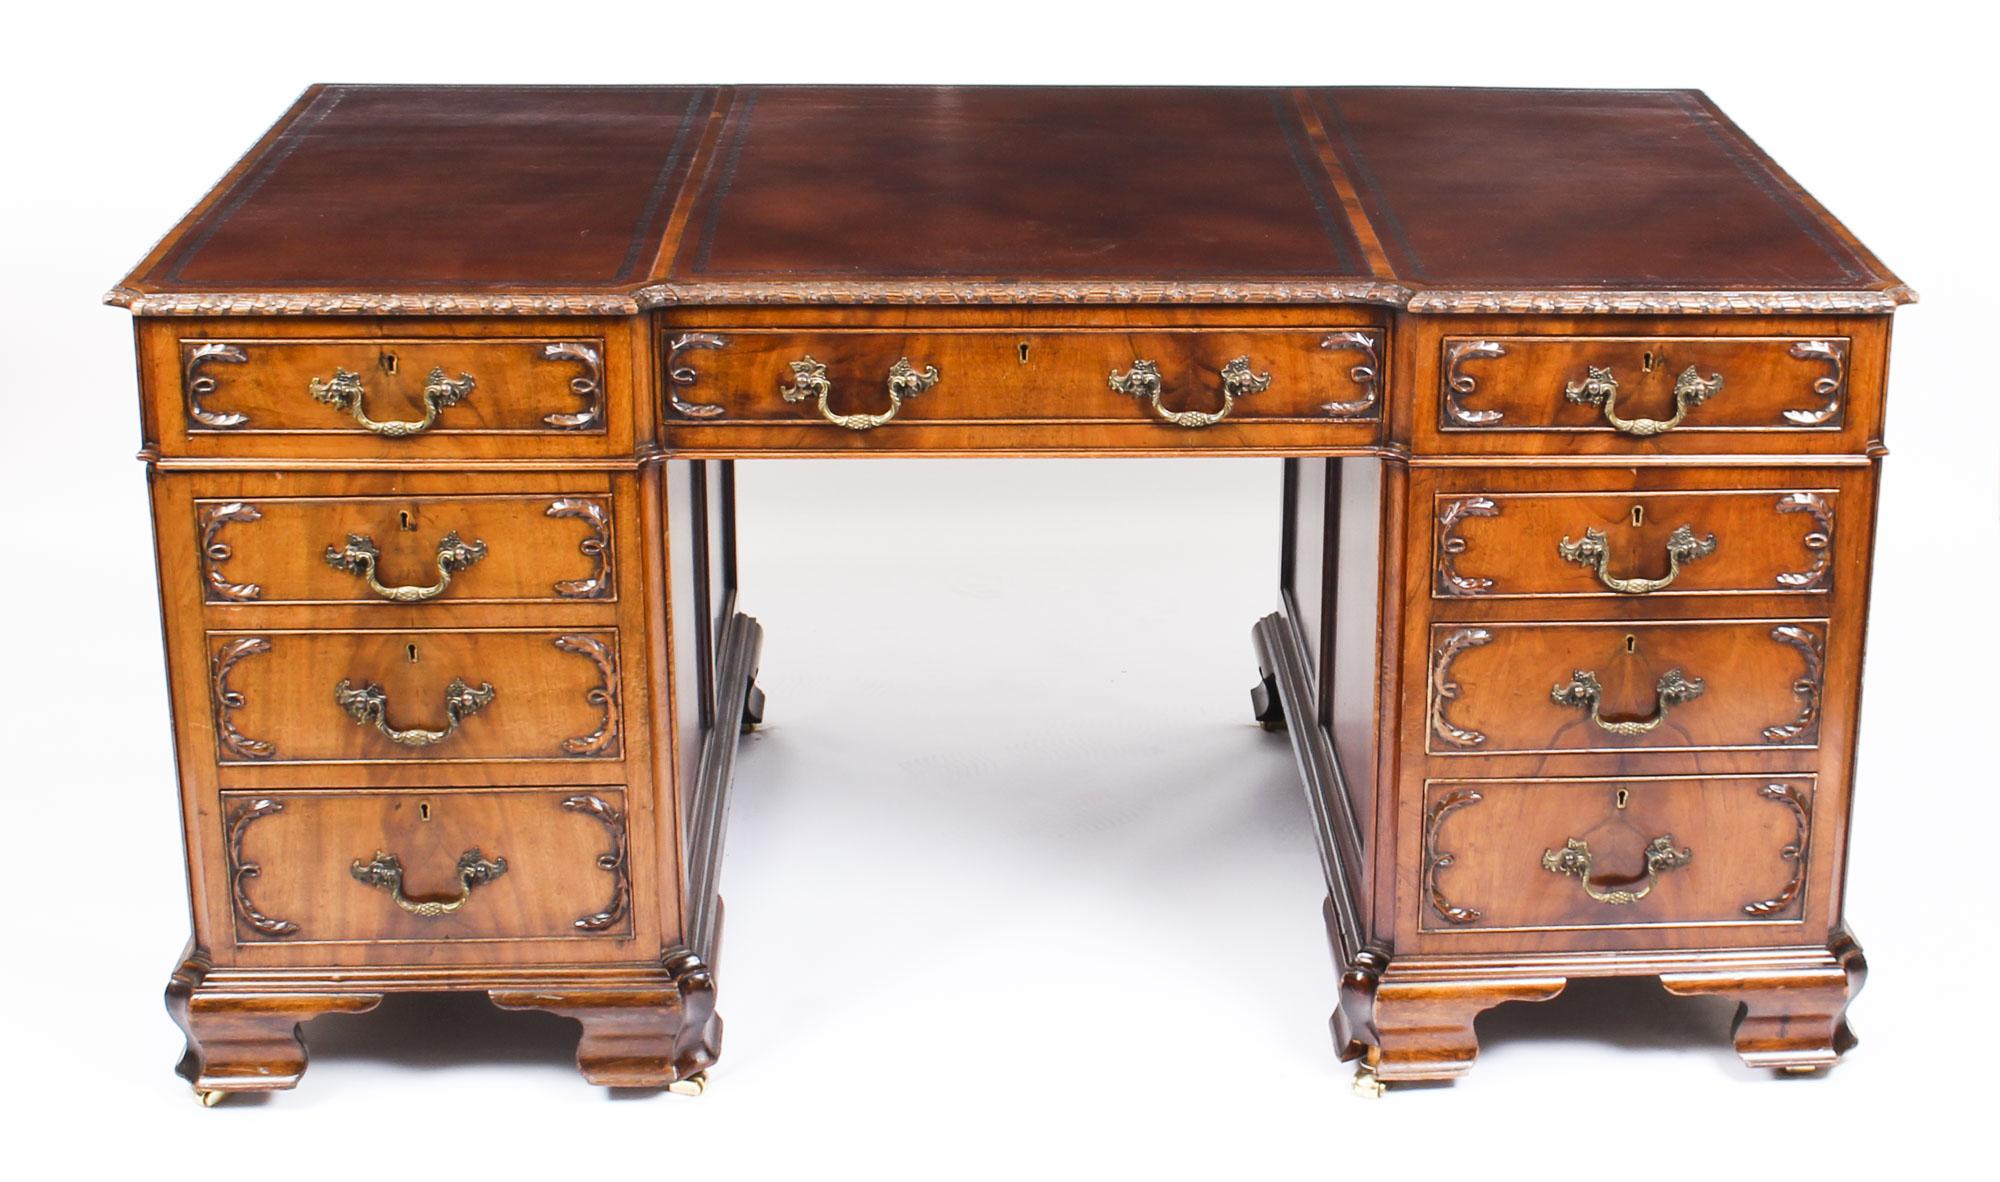 This is a wonderful antique flame mahogany twin pedestal partners desk in the stunning George III manner, circa 1870 in date.
 
The rectangular desk is of inverted breakfront outline and the top features an inset three part blind tooled tan